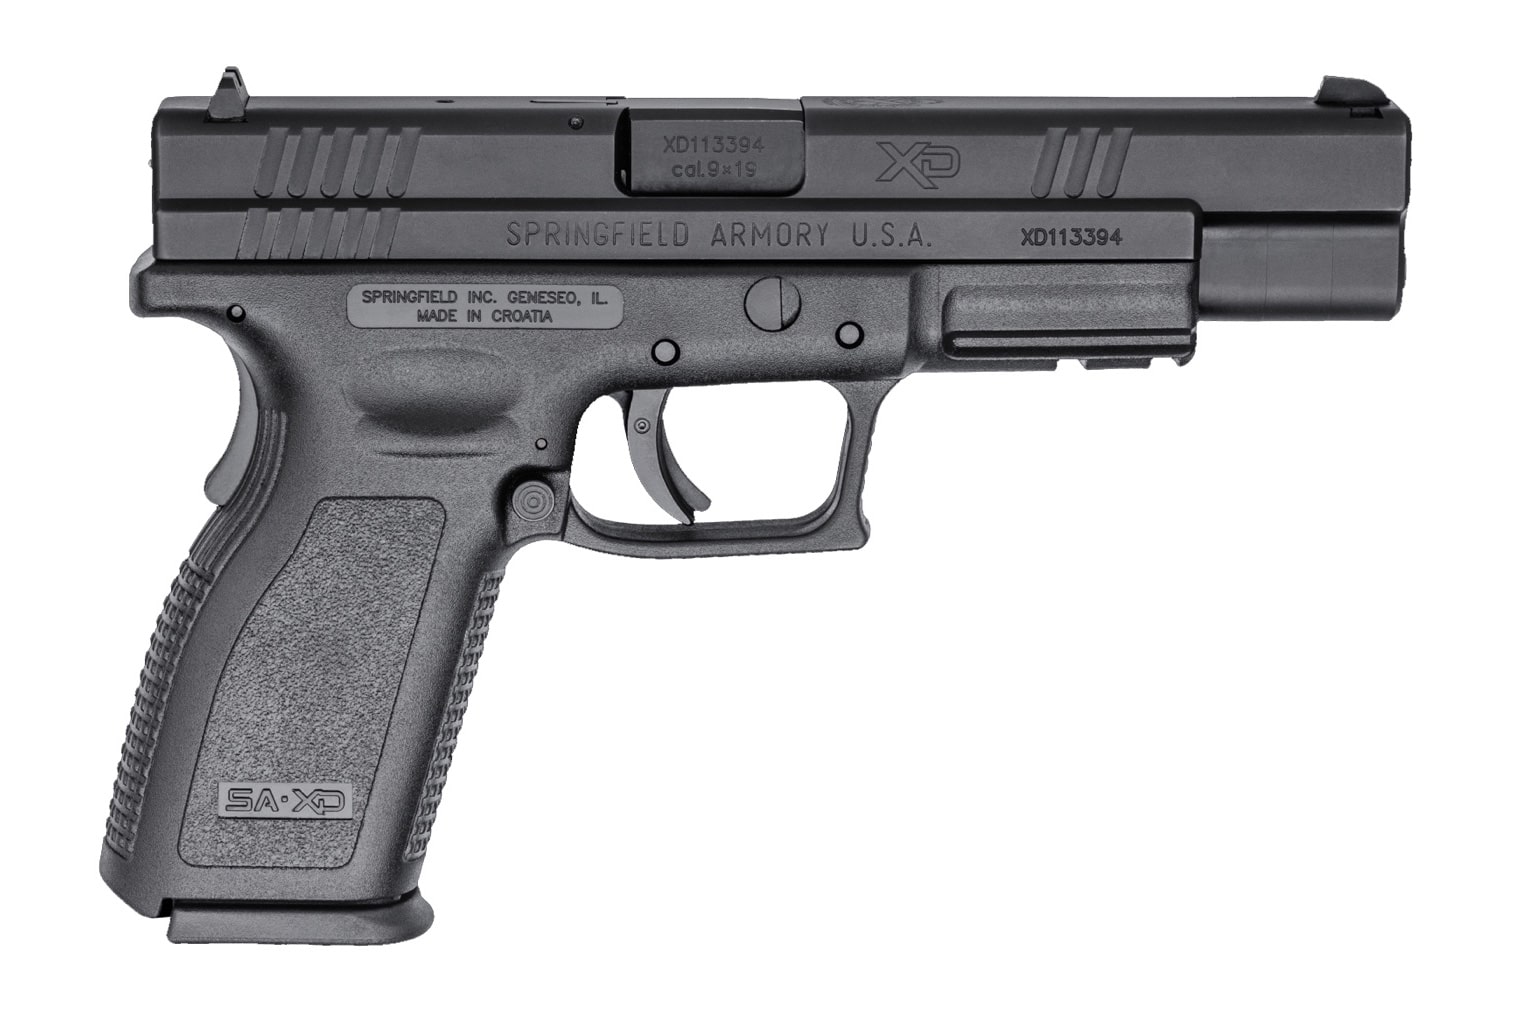 In this digital image is a Springfield Armory XD Tactical 9mm pistol shown from the right side of the firearm.